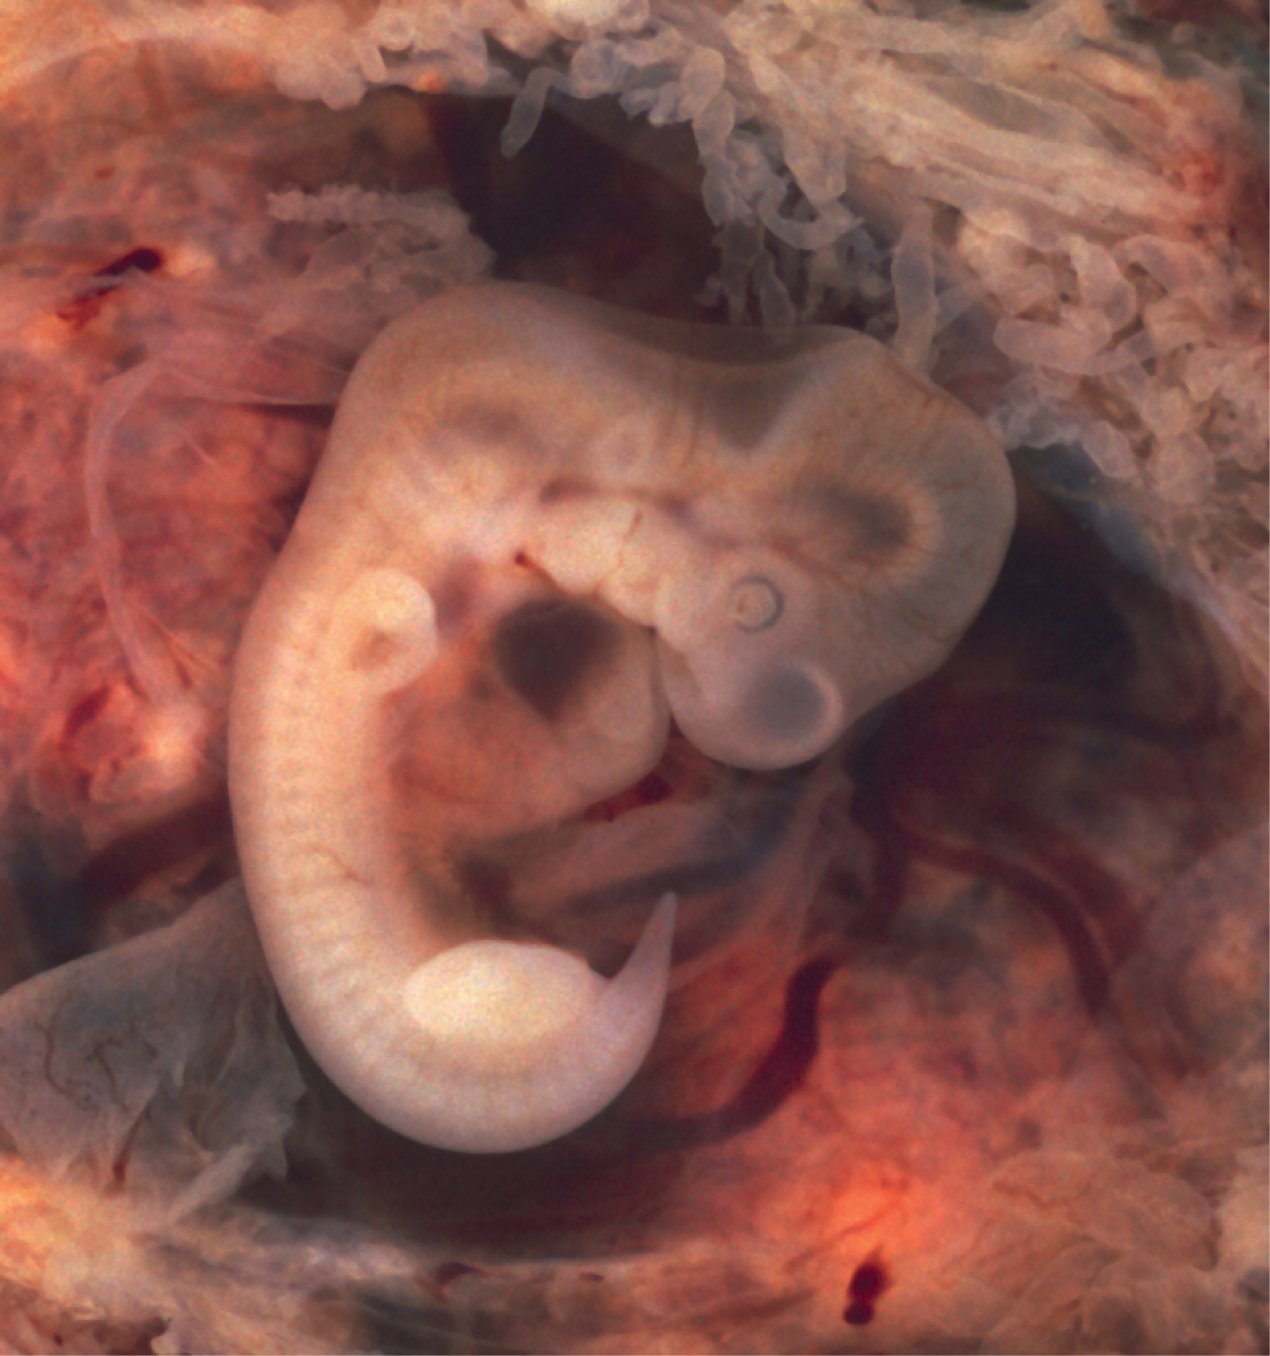 A photograph of an embryo derived from an ectopic pregnancy is shown.